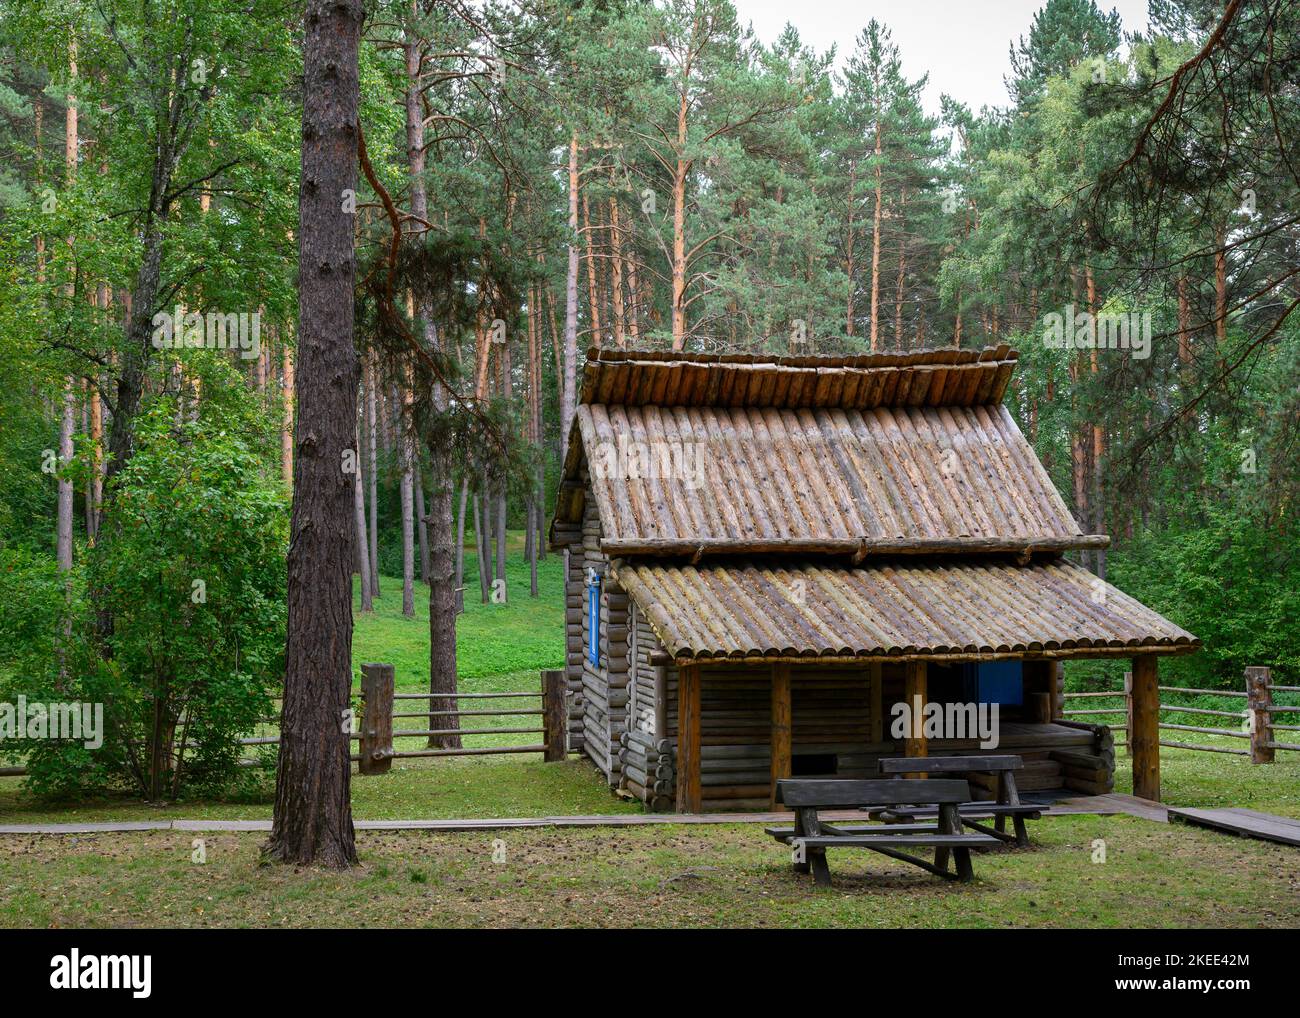 Traditional wooden hut of the 19th century of the Siberian Shor people in the forest Stock Photo